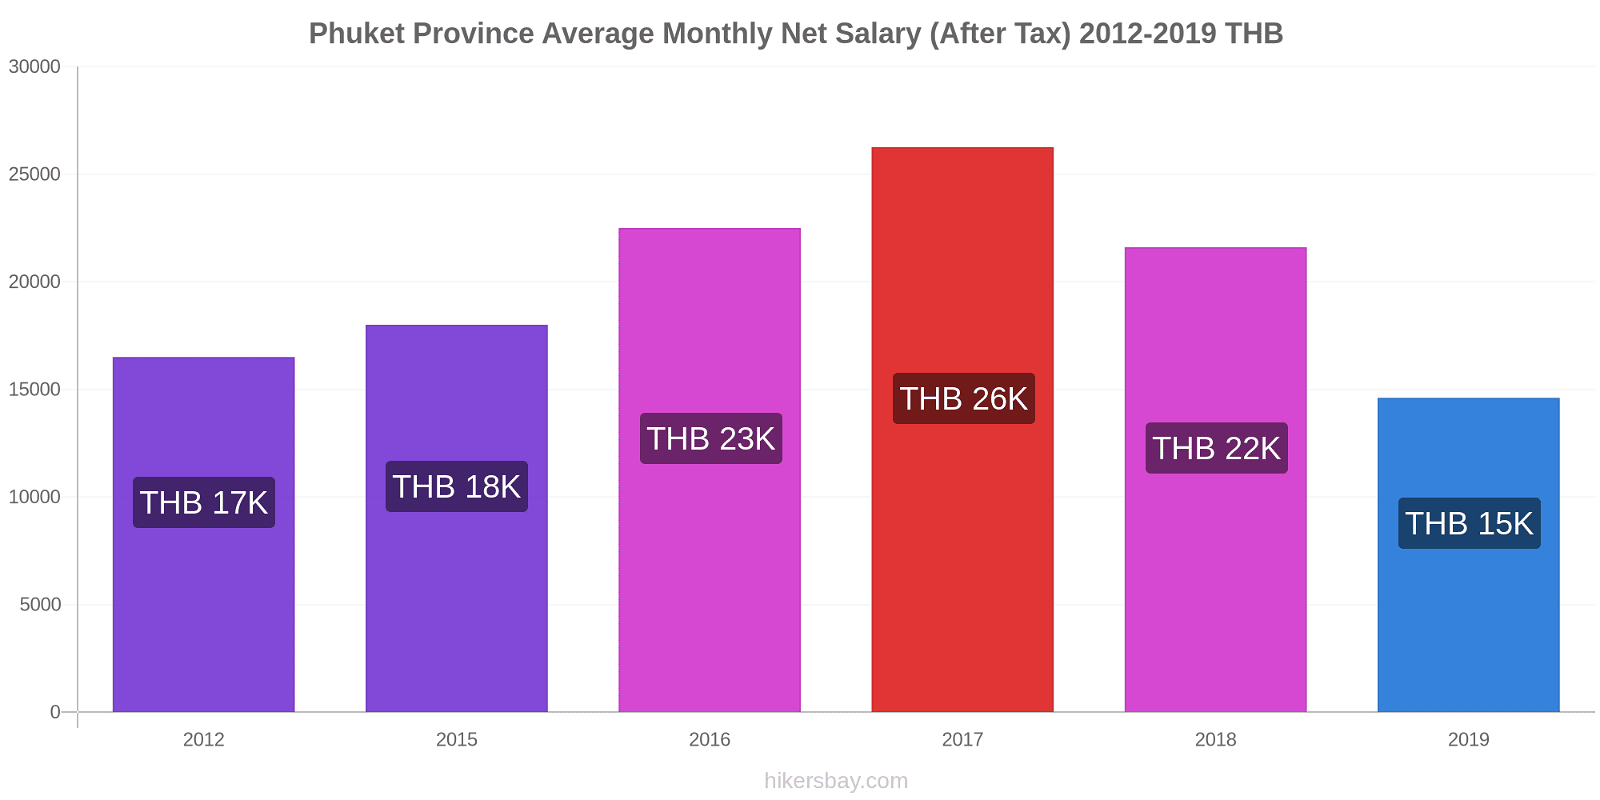 Phuket Province price changes Average Monthly Net Salary (After Tax) hikersbay.com